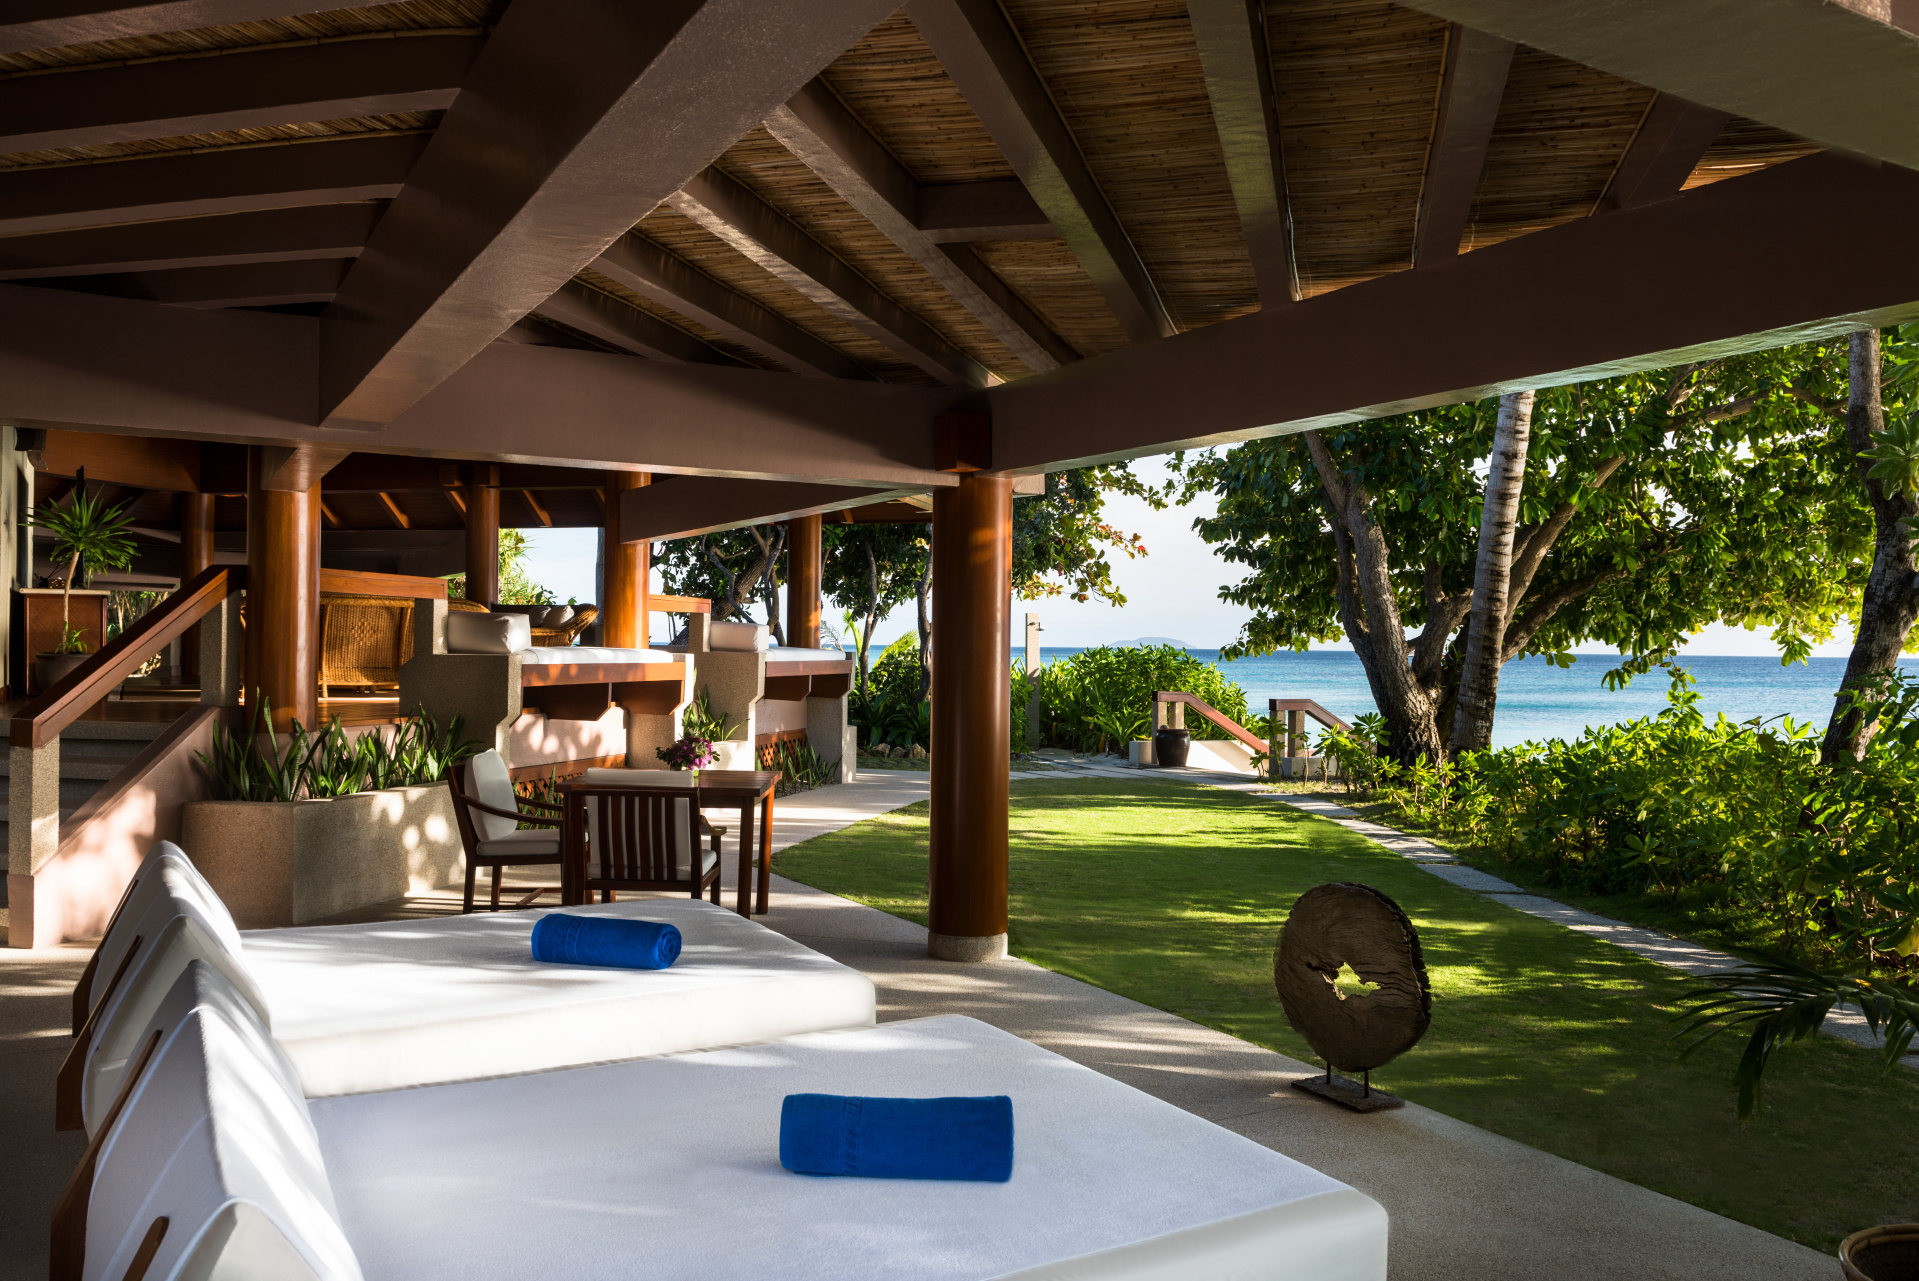 The villa offers al fresco living and dining pavilions overlooking the shore